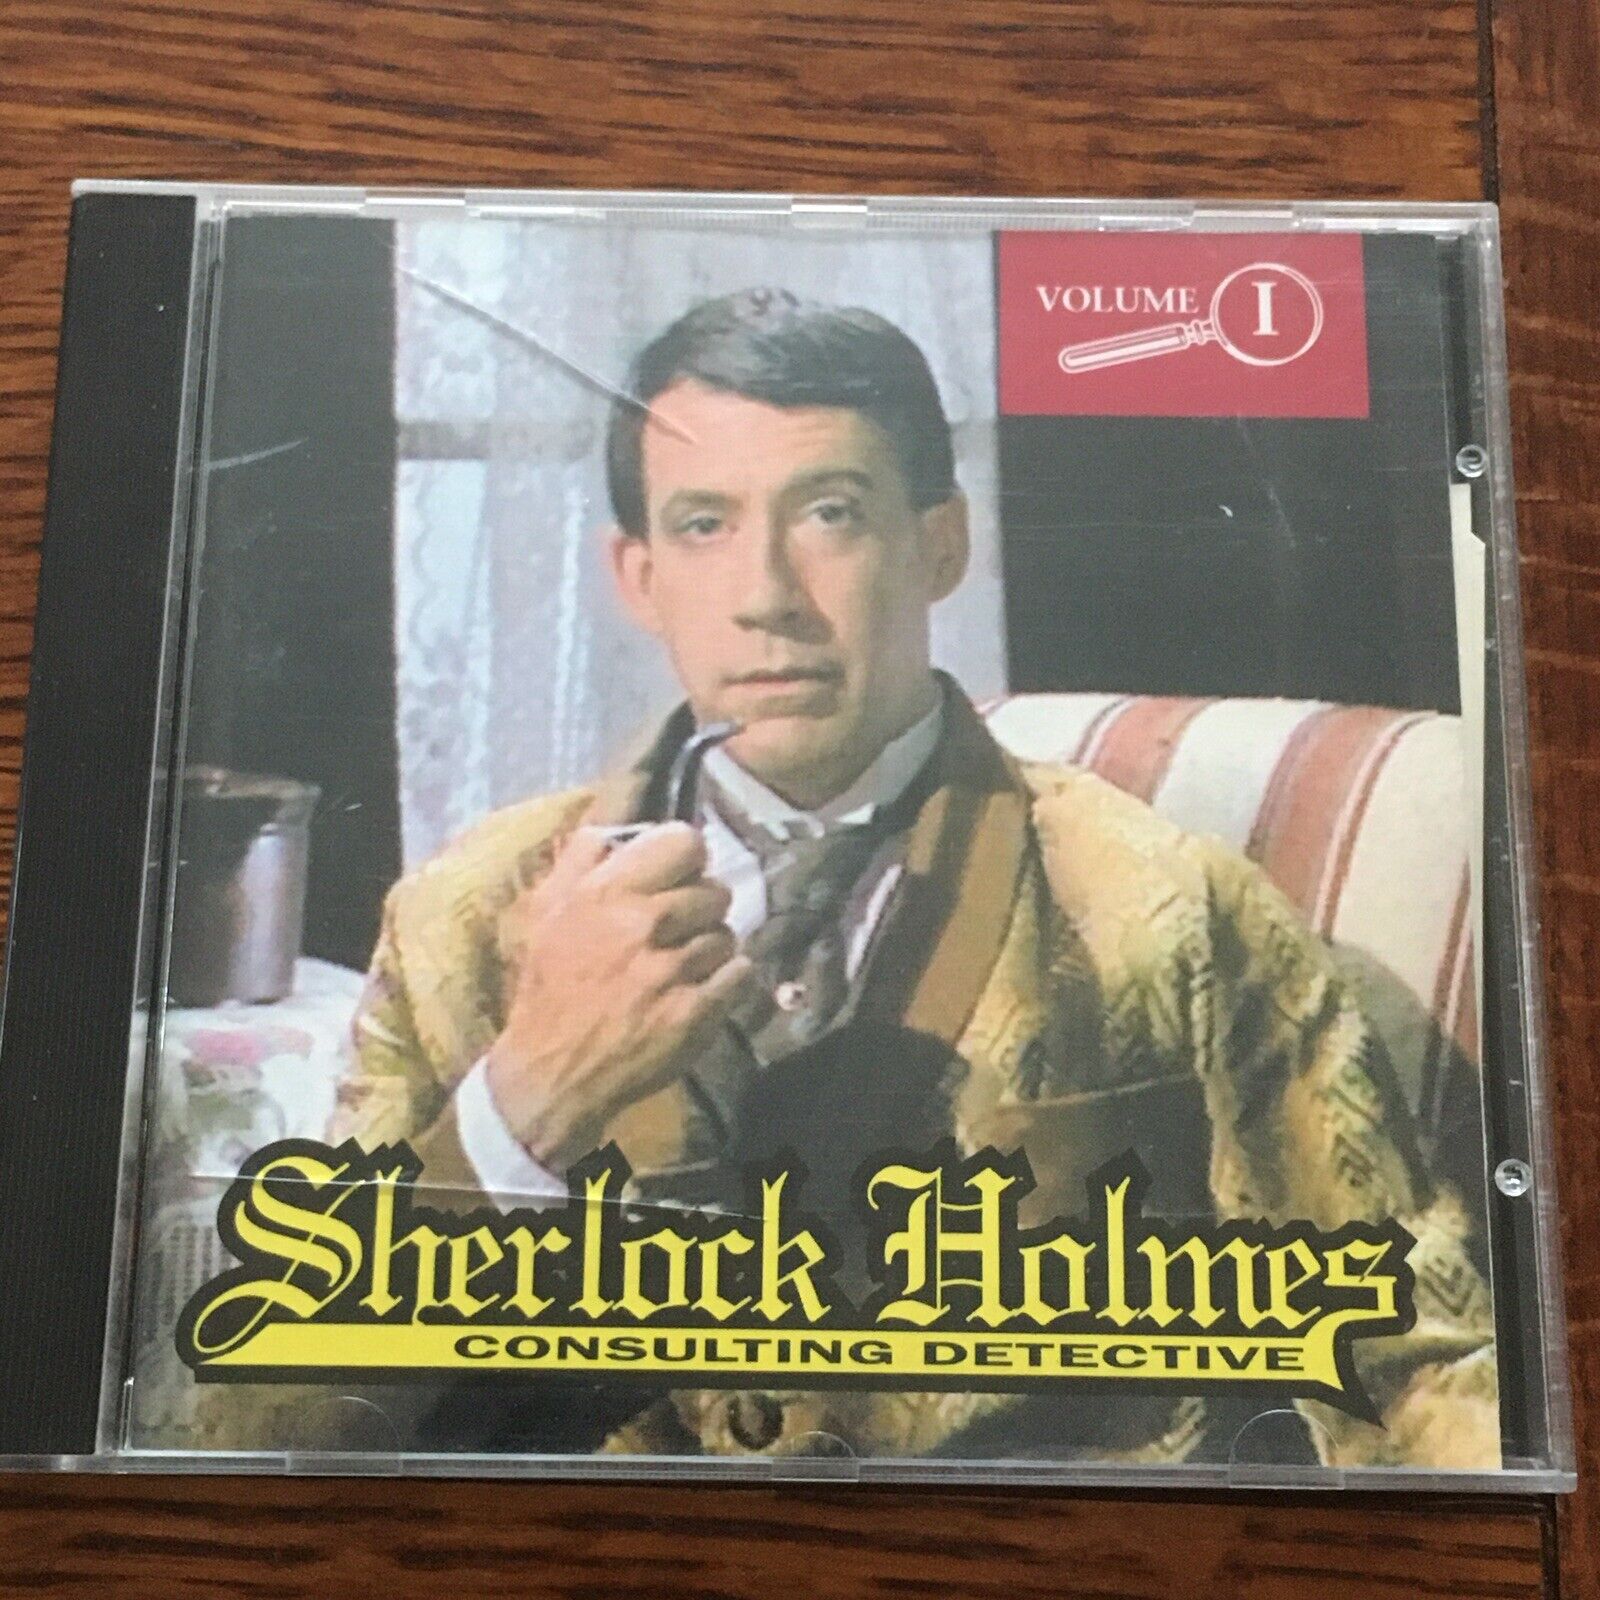 Sherlock Holmes Consulting Detective Vol 1 CD-ROM complete with newspapers 1993